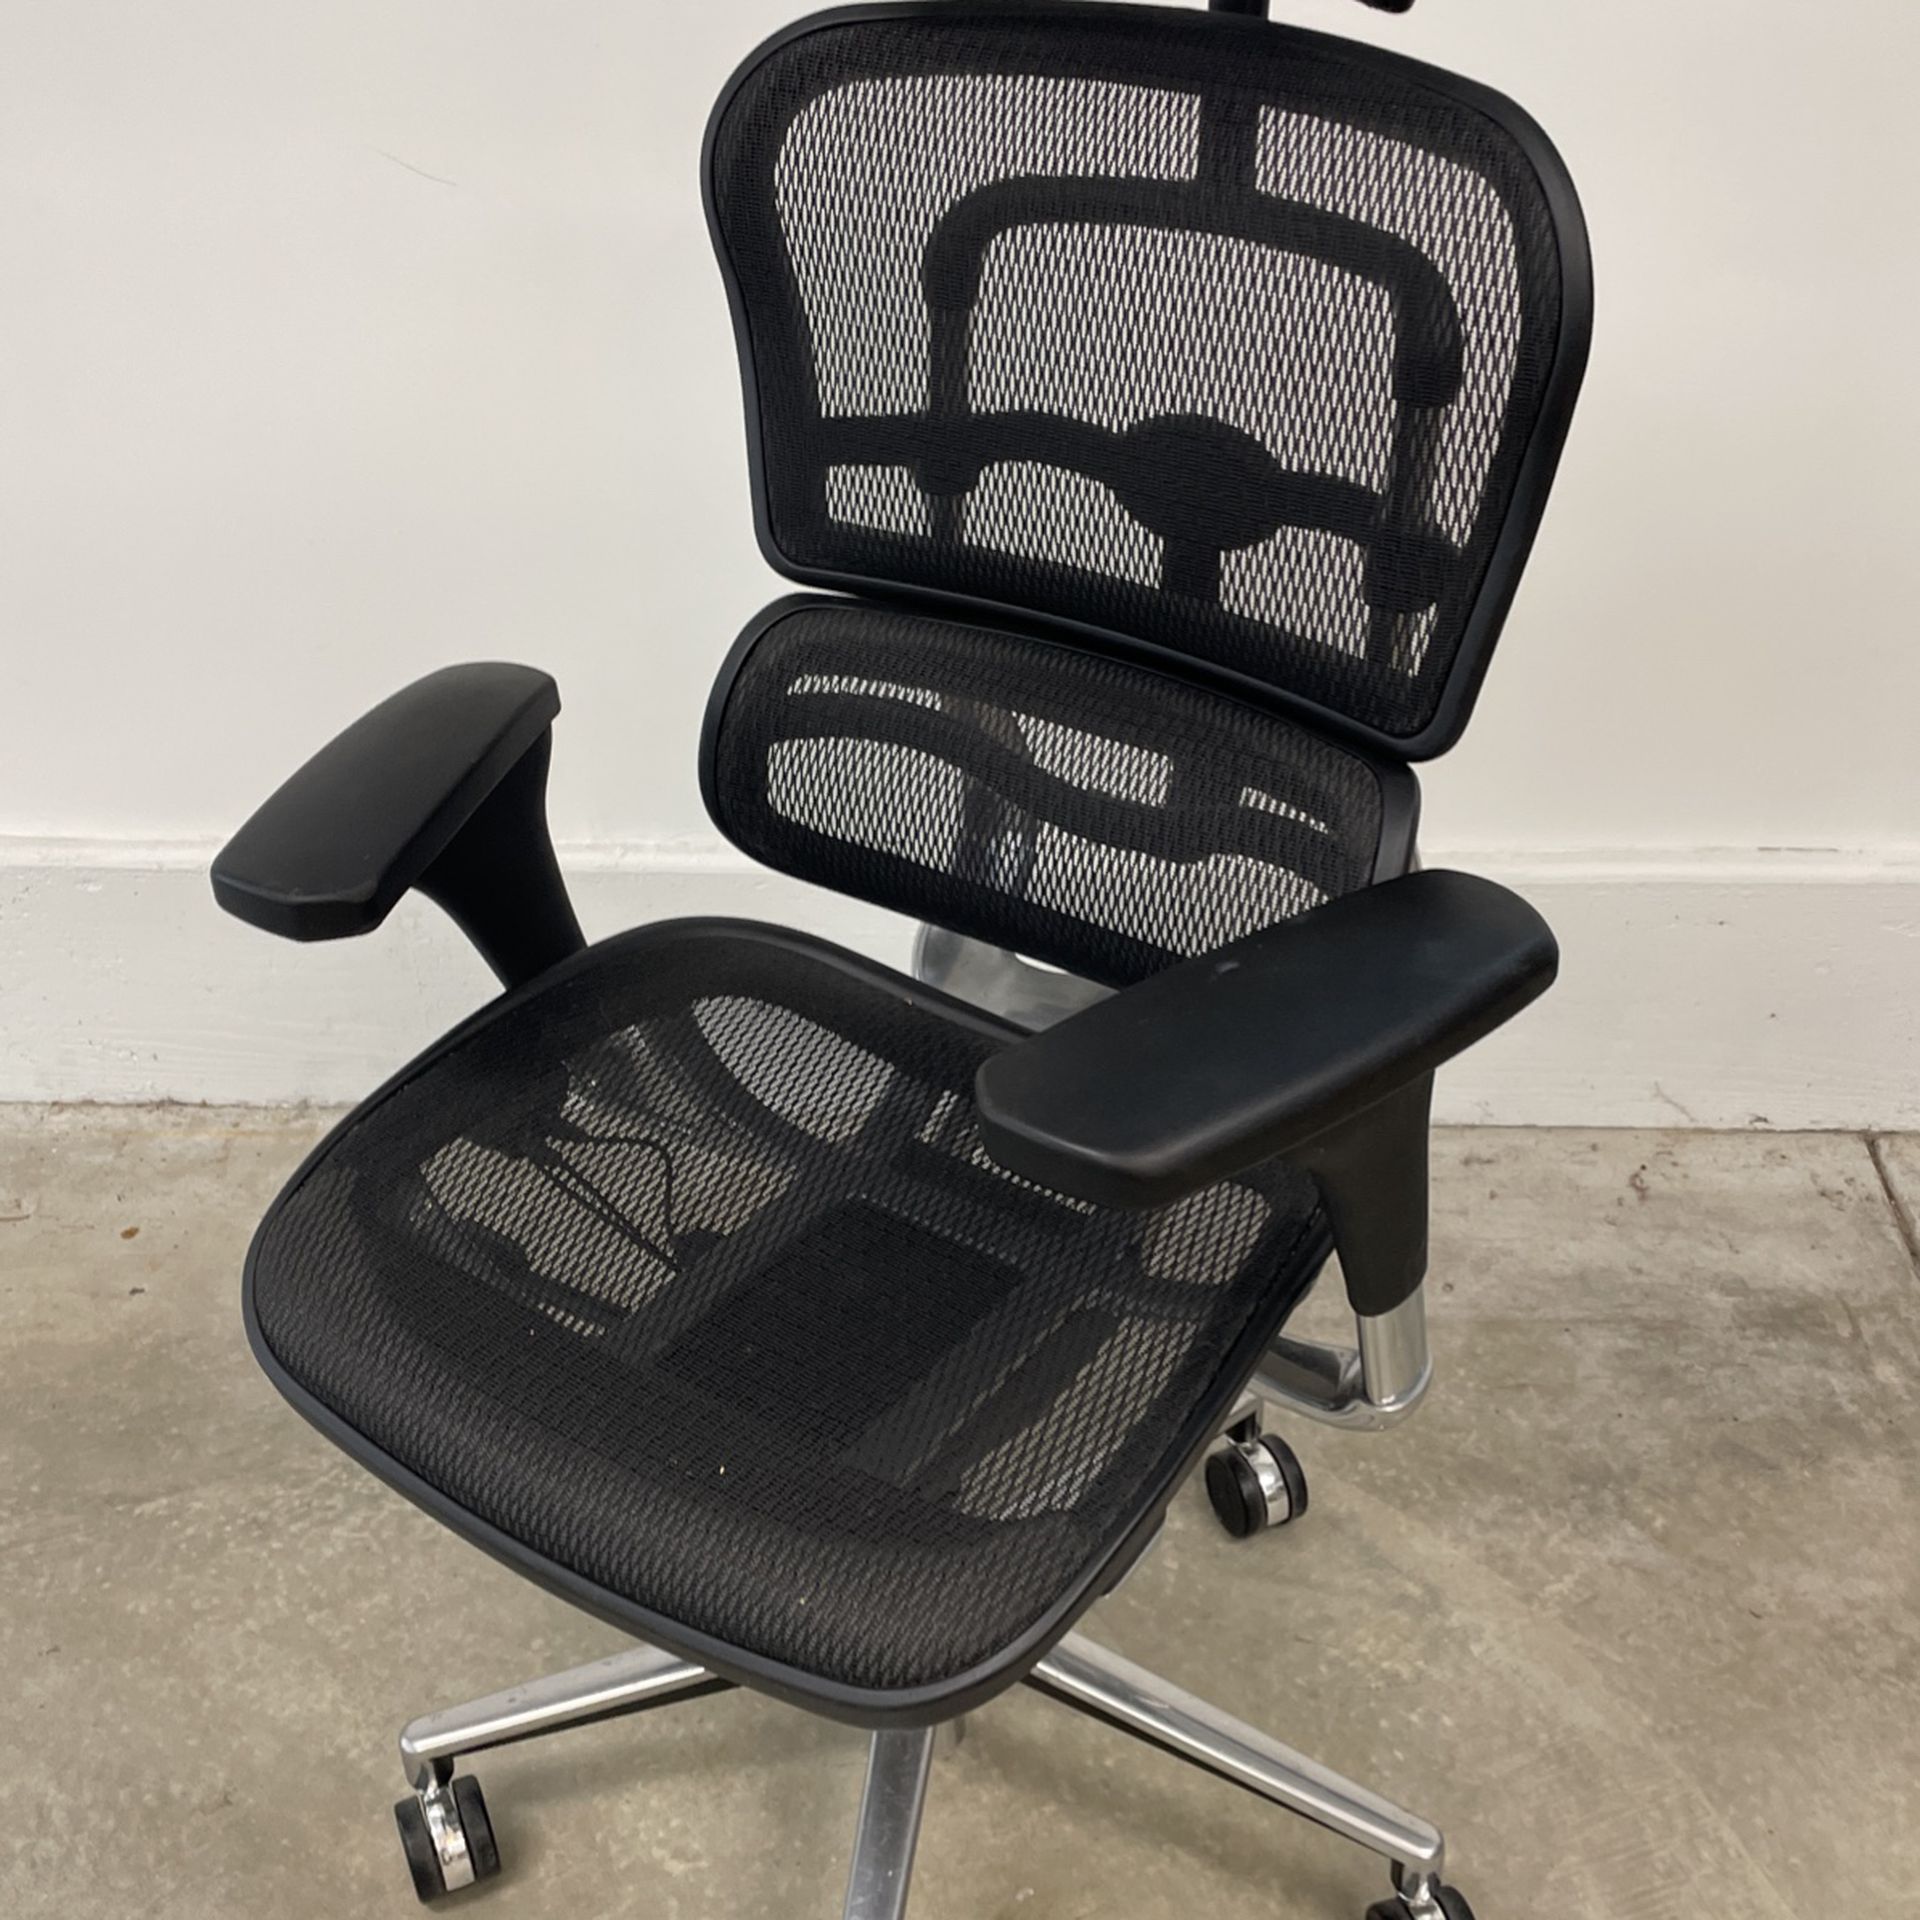 ErgoHuman Ergonomic Office Chair Black - With Headrest And Adjustable Arm Rests